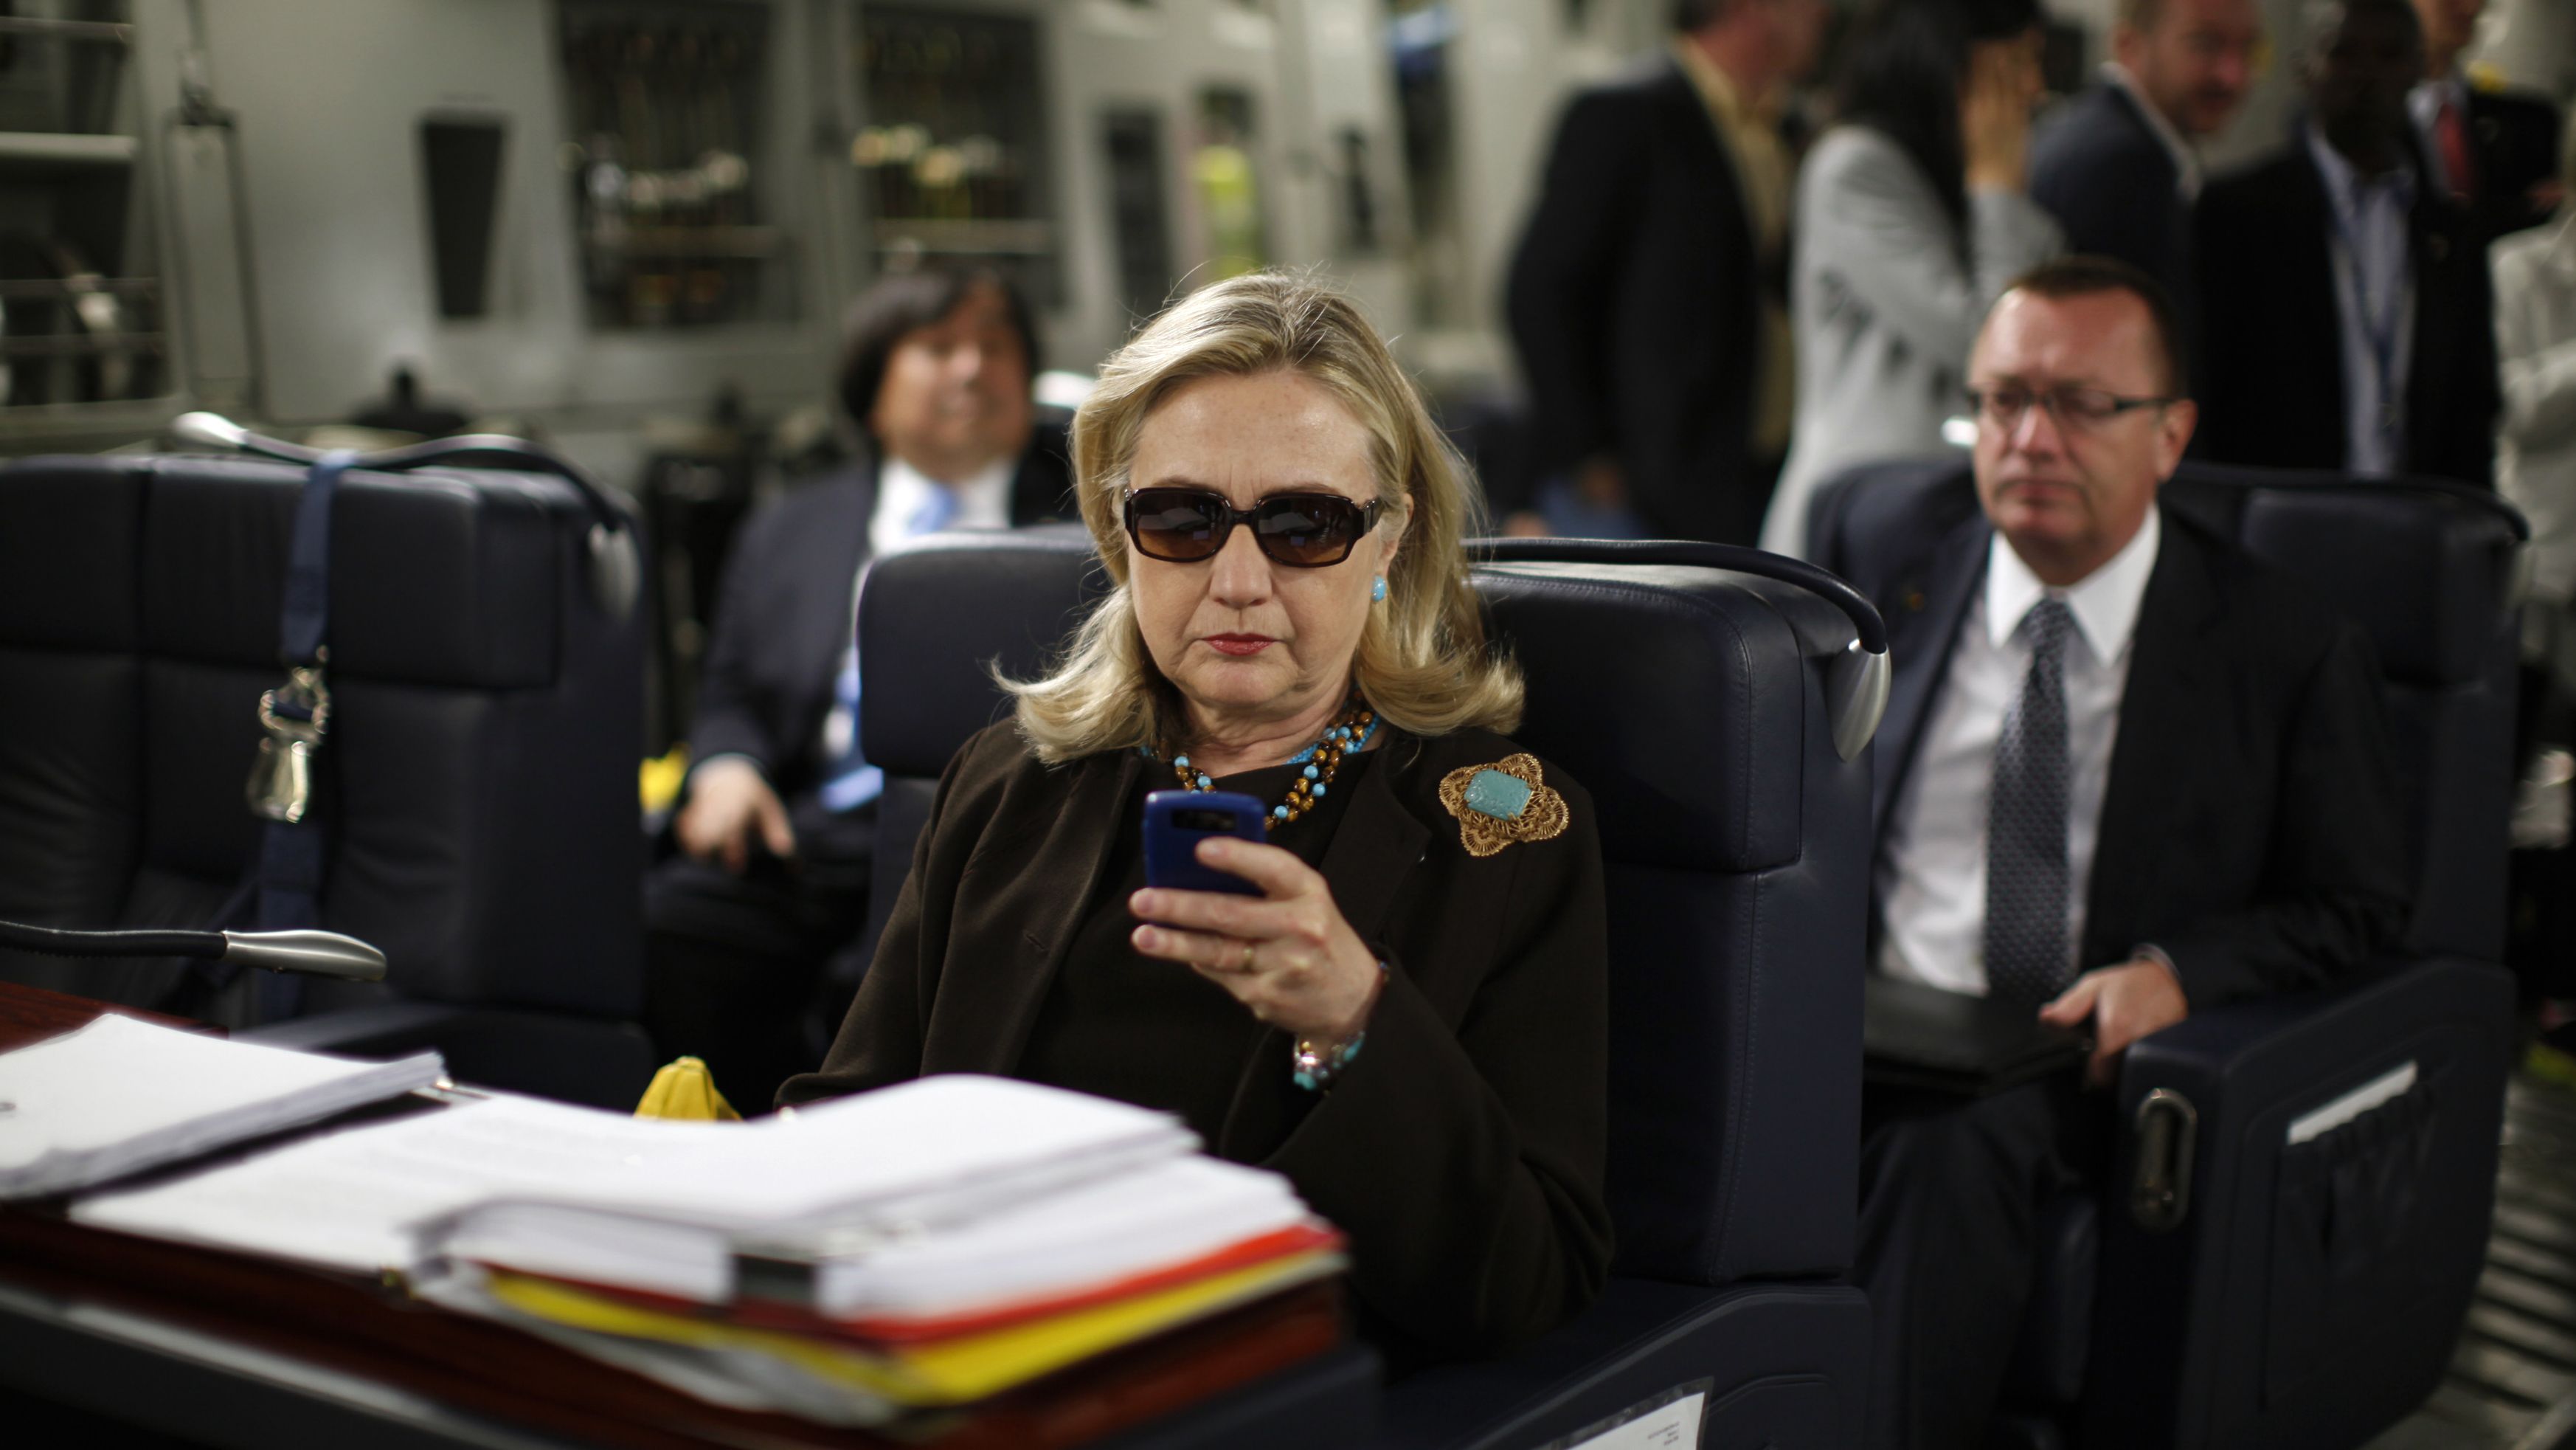 Hillary Clinton, while US secretary of state, checks her BlackBerry on a military plane in October 2011. Clinton said she used a private email account for her official work at the State Department and that she did so out of convenience. The FBI investigated whether Clinton or her aides had mishandled classified information either intentionally or in a grossly negligent way. In 2016, FBI Director James Comey <a href="https://www.cnn.com/2016/07/05/politics/fbi-director-doesnt-recommend-charges-against-hillary-clinton/index.html" target="_blank">said he would not recommend charges against Clinton,</a> but he rebuked her and her aides for being "extremely careless" in the handling of classified information.